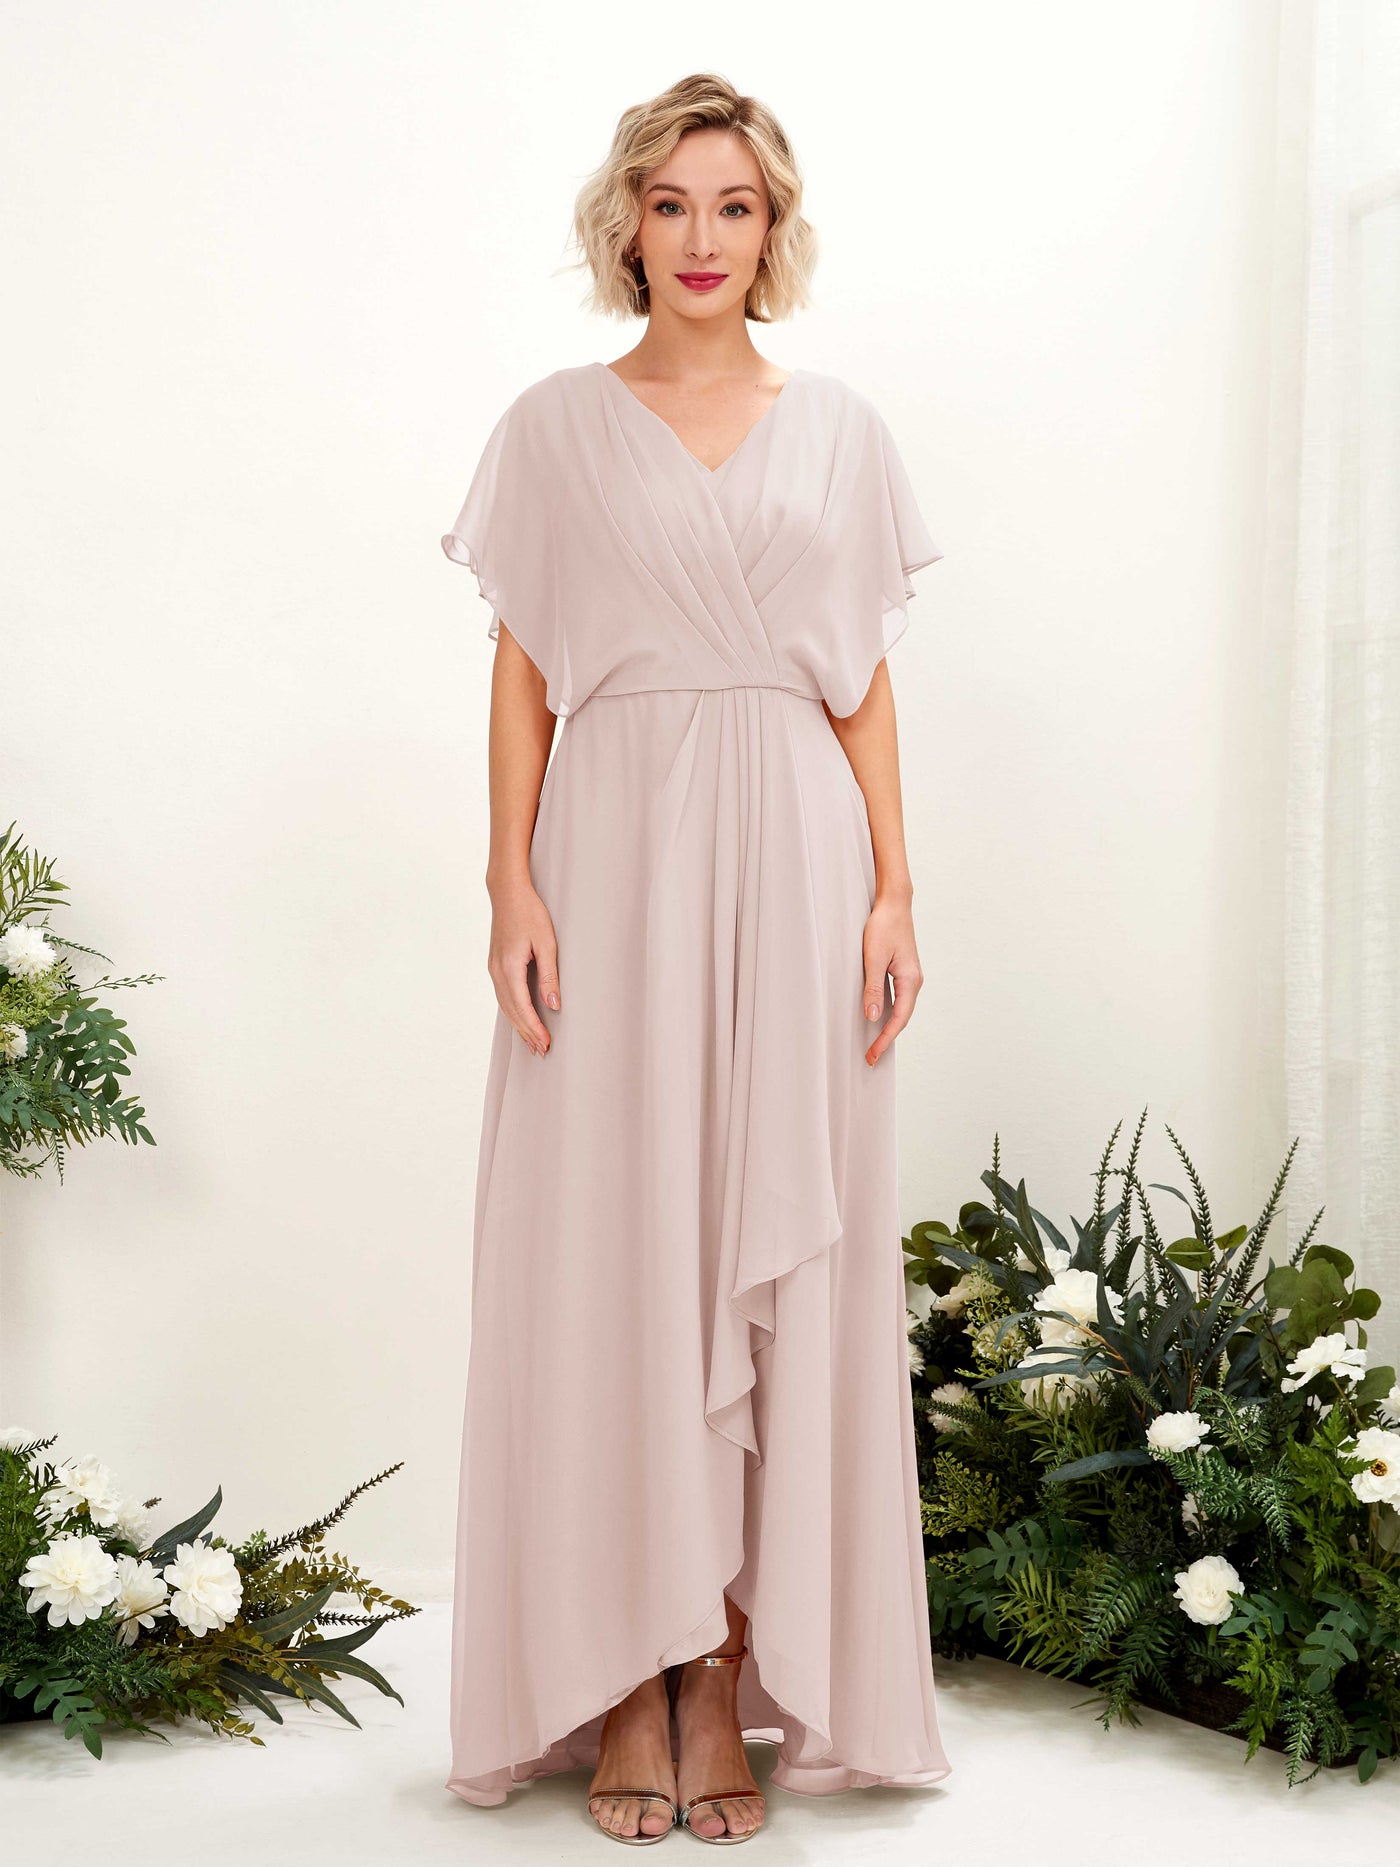 Biscotti Bridesmaid Dresses Bridesmaid Dress A-line Chiffon V-neck Full Length Short Sleeves Wedding Party Dress (81222135)#color_biscotti